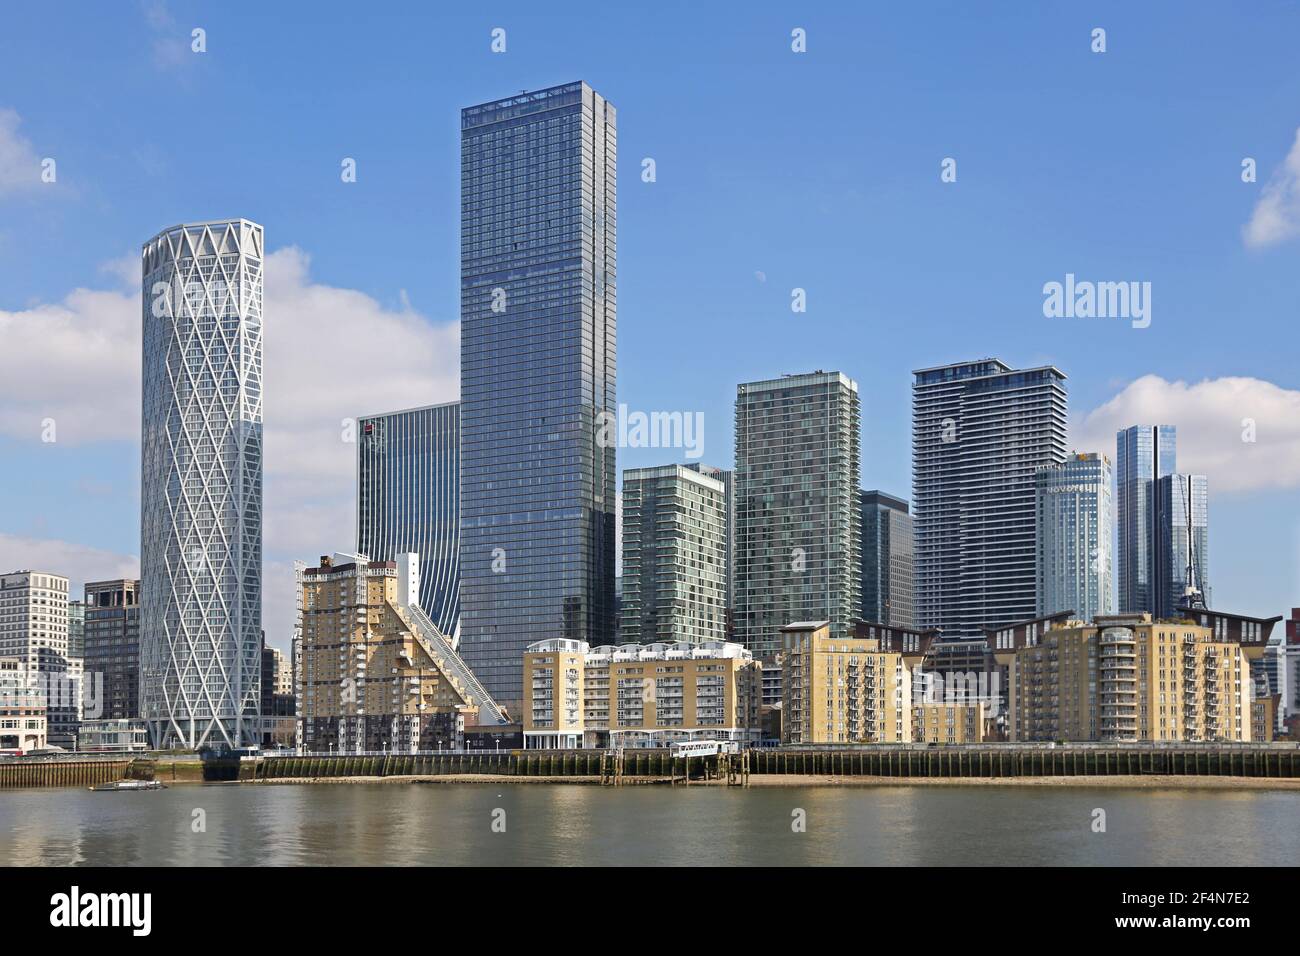 Canary Wharf, London. View from Rotherhithe showing newly completed towers, 2021: Newfoundland (far left) and Landmark Pinnacle (centre) Stock Photo